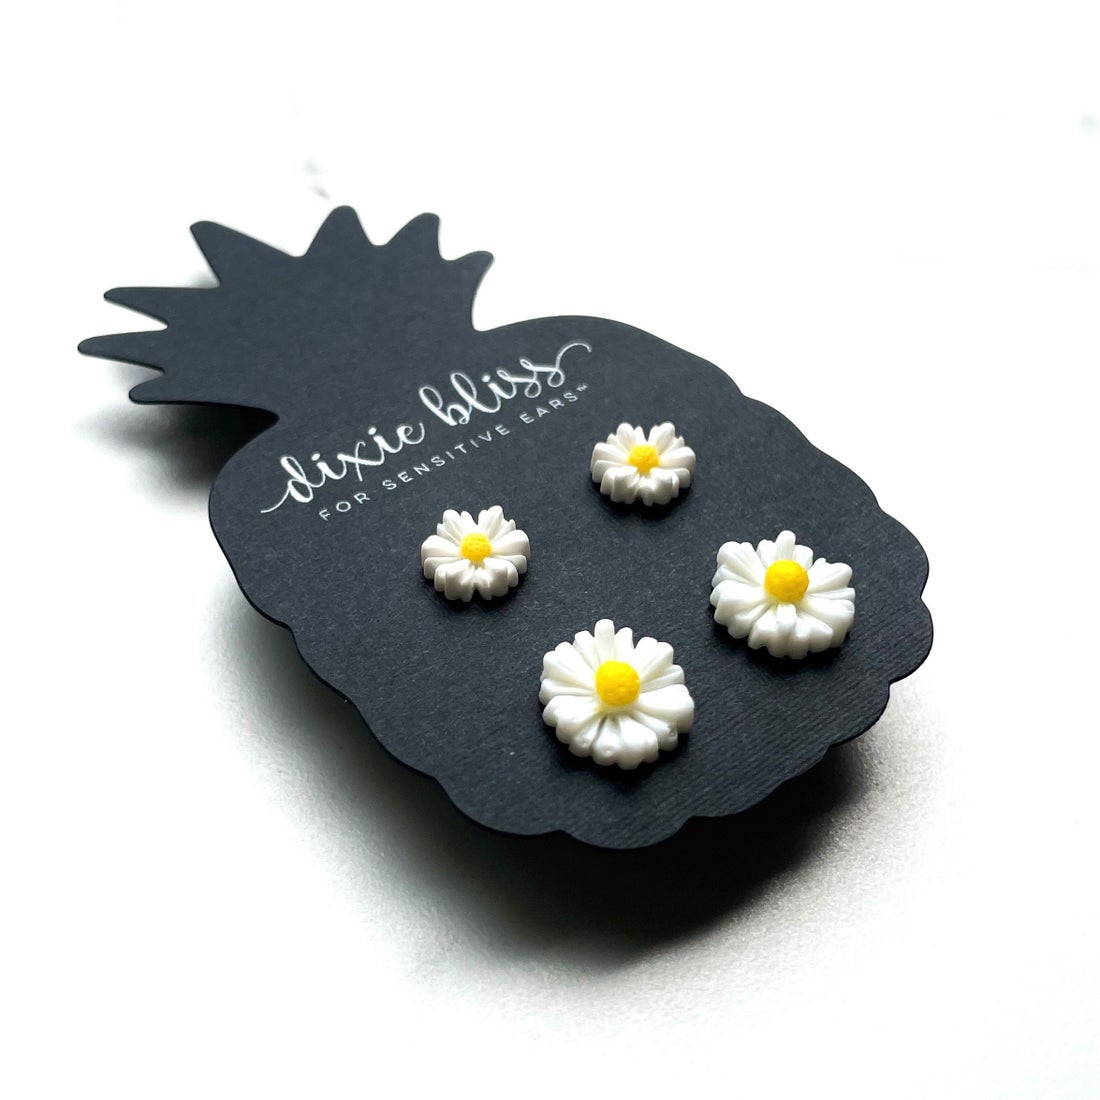 Mommy & Me White Daisy - Dixie Bliss - Duo Stud Earring Set